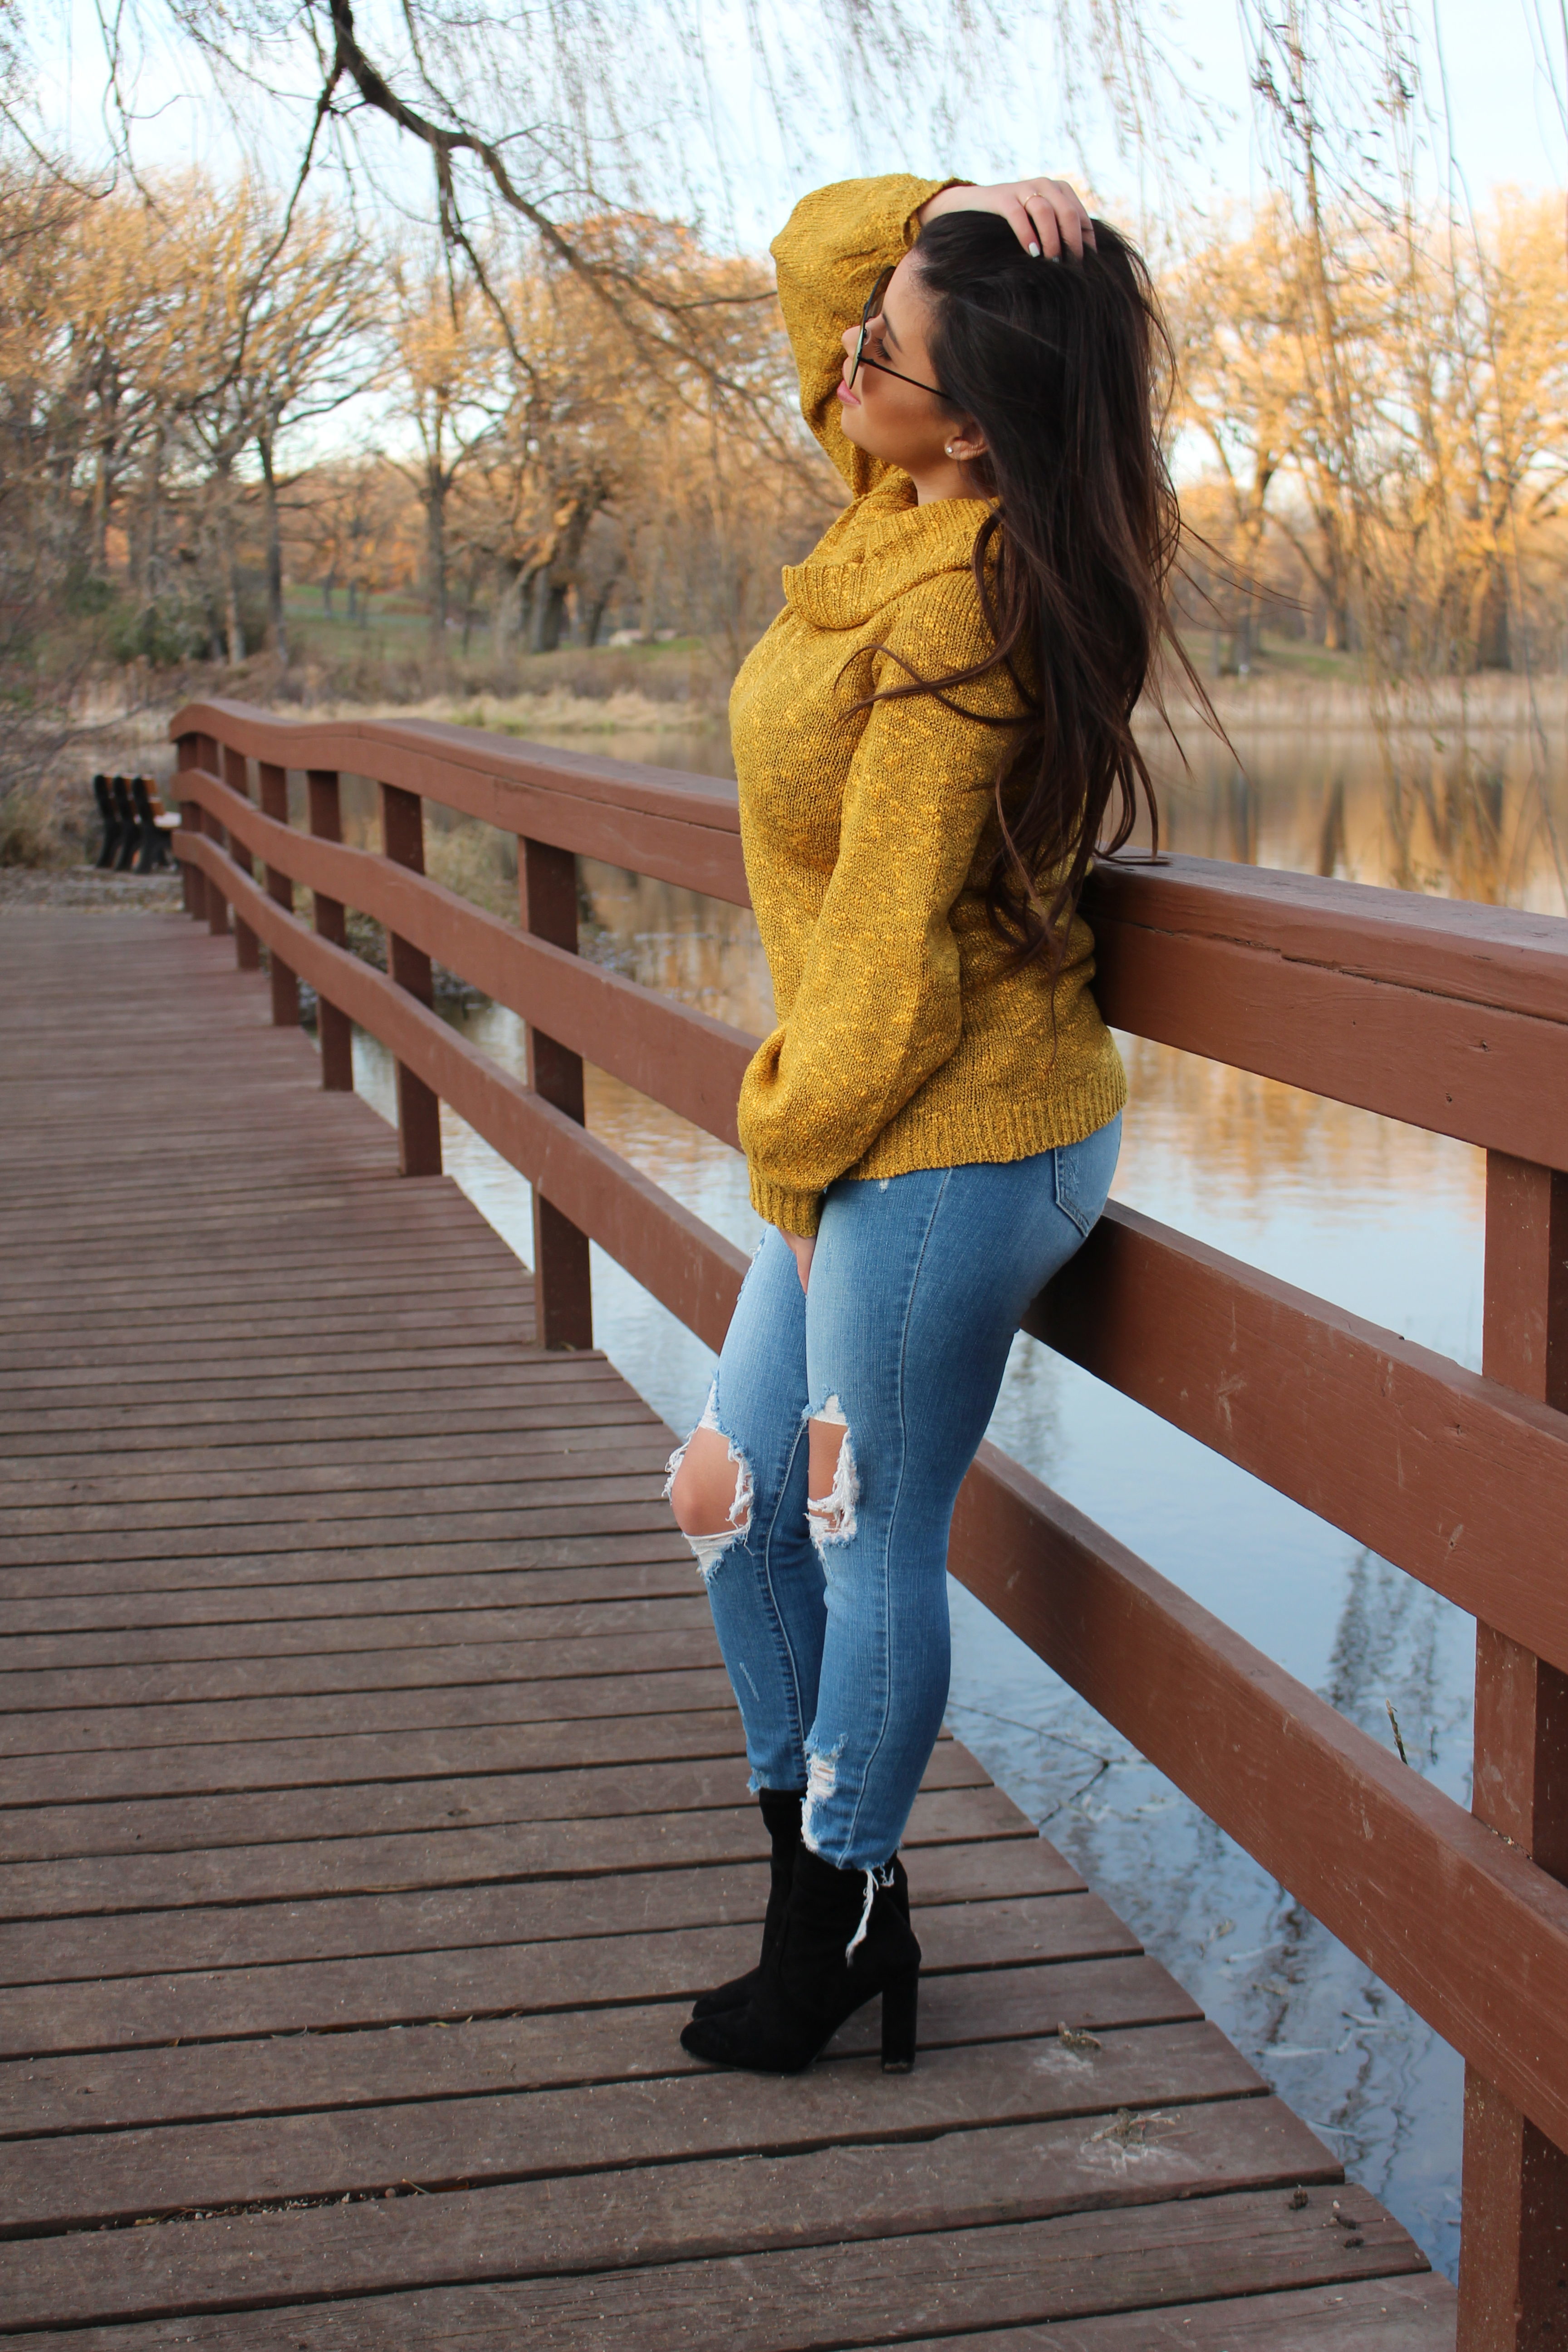 sweater mostaza cut out jeans fall outfit OOTD perfect fall outfit steve madden booties quay australia sunglasses indio by alejandra avila tufashionpetite